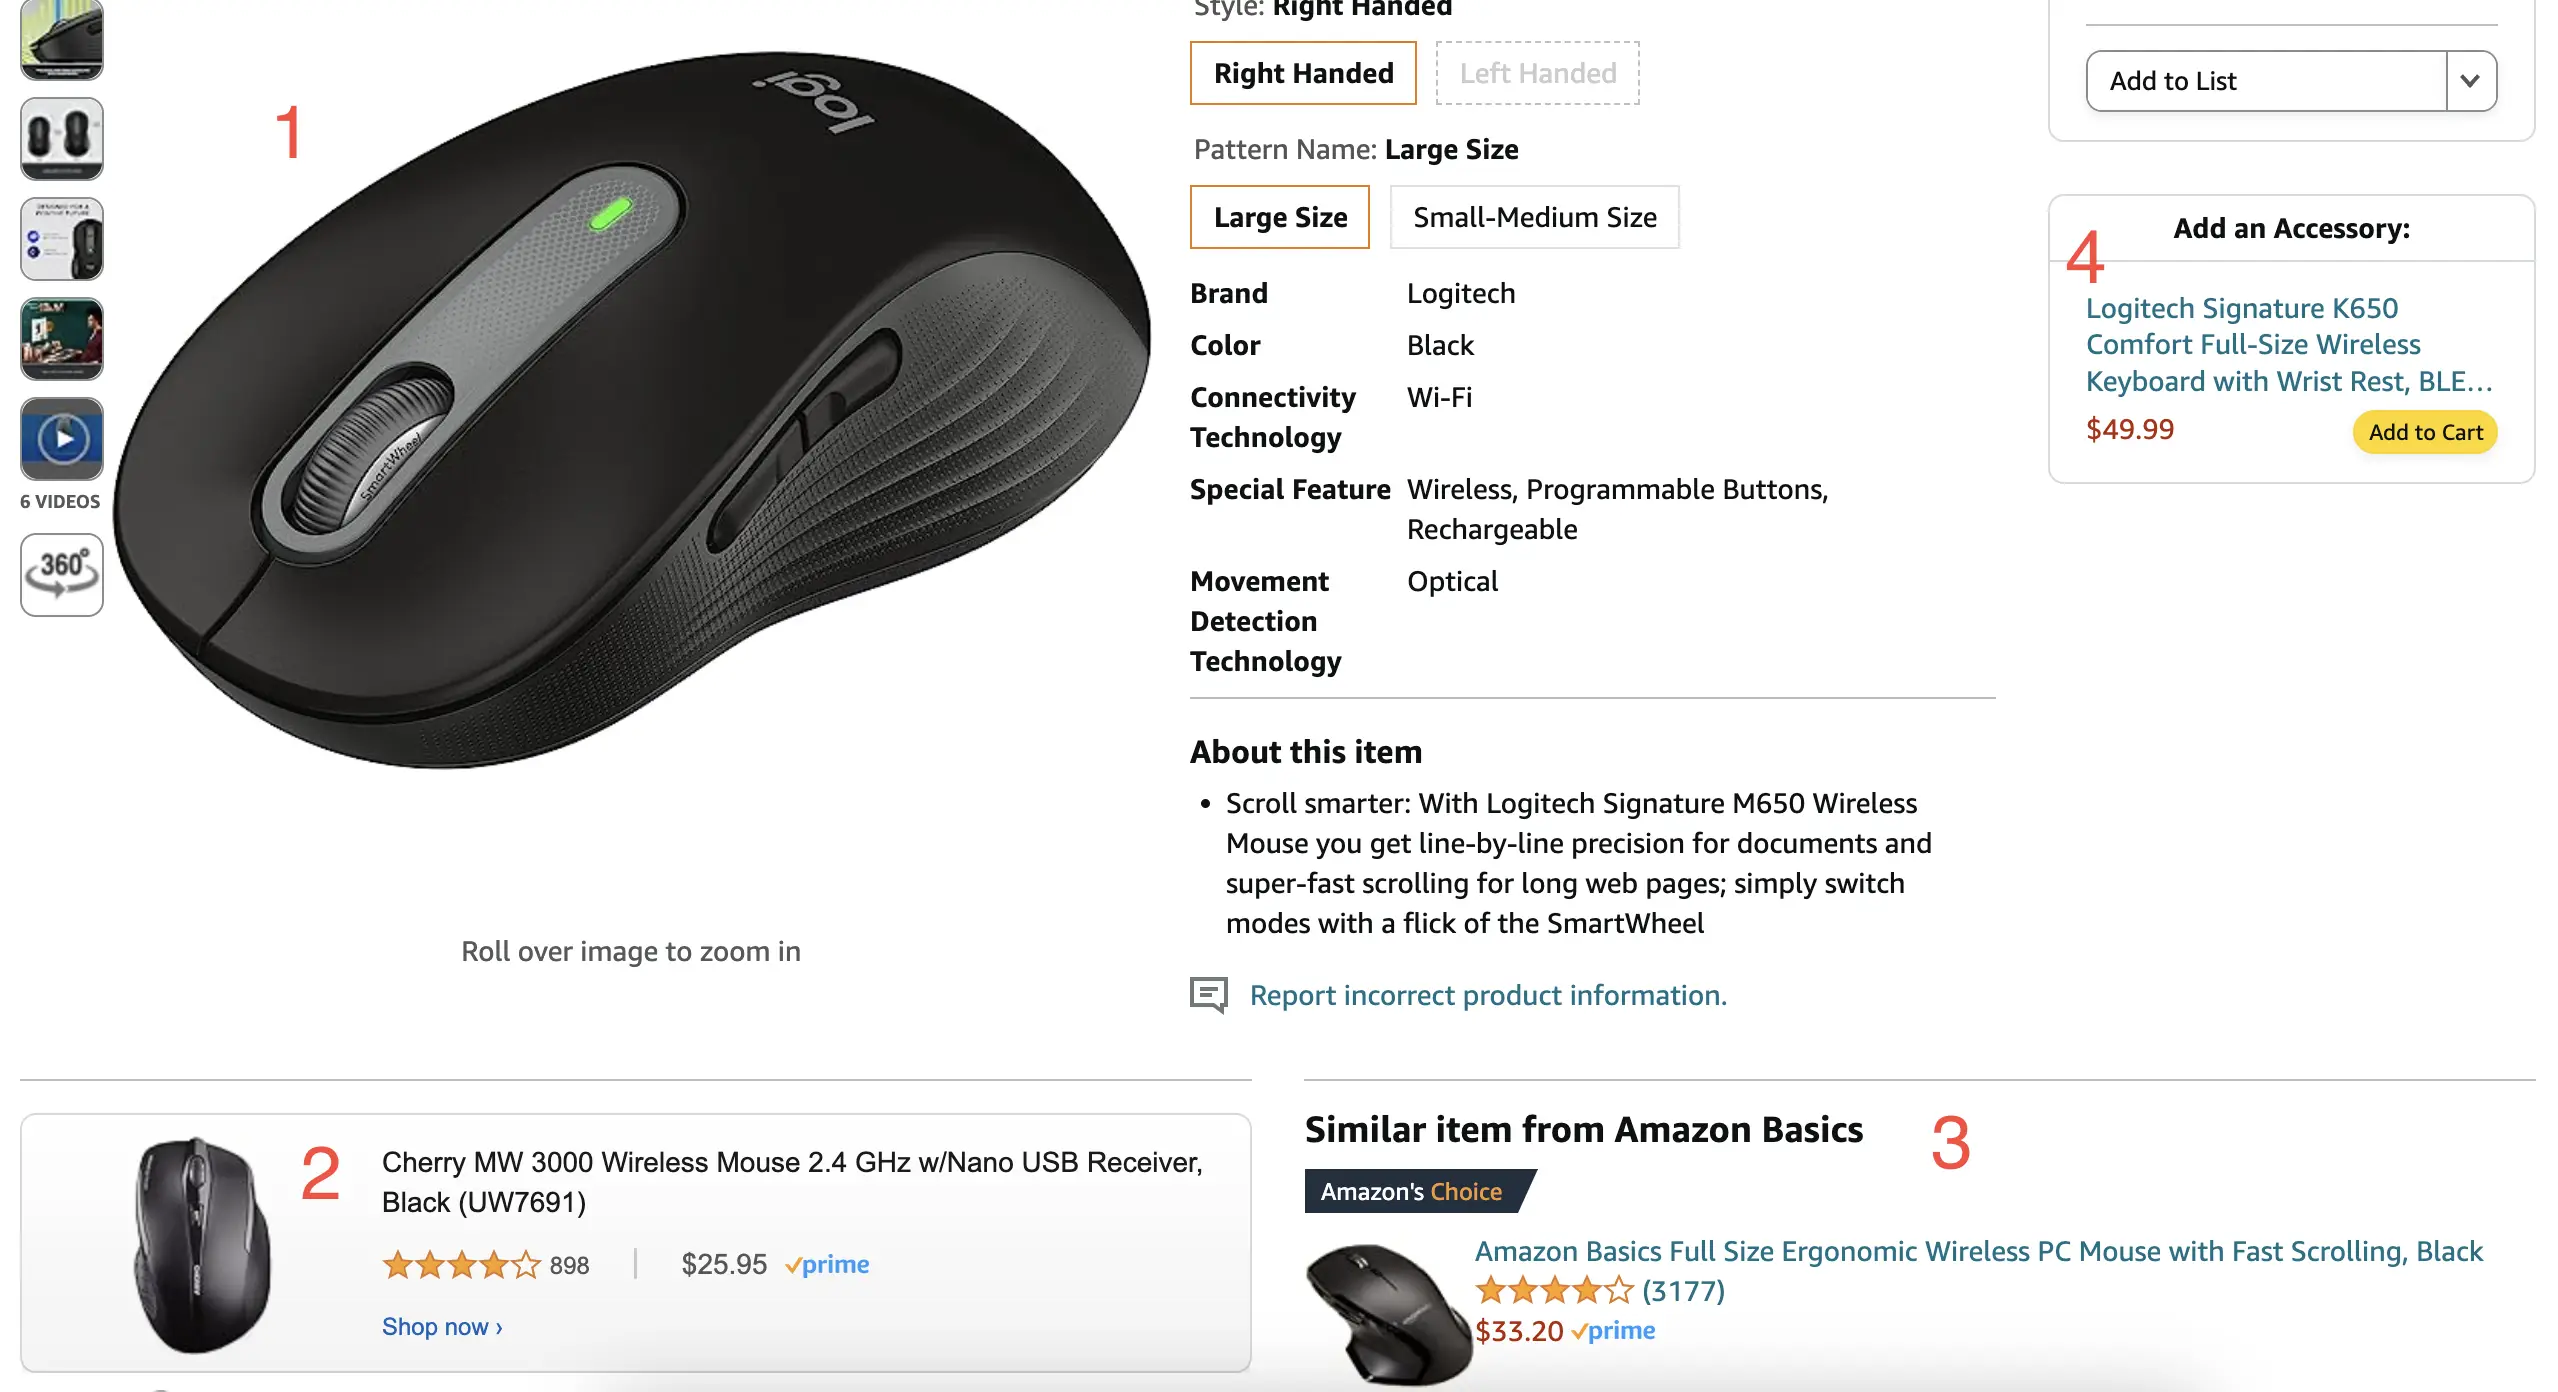 Image of amazon.com page showin a computer mouse